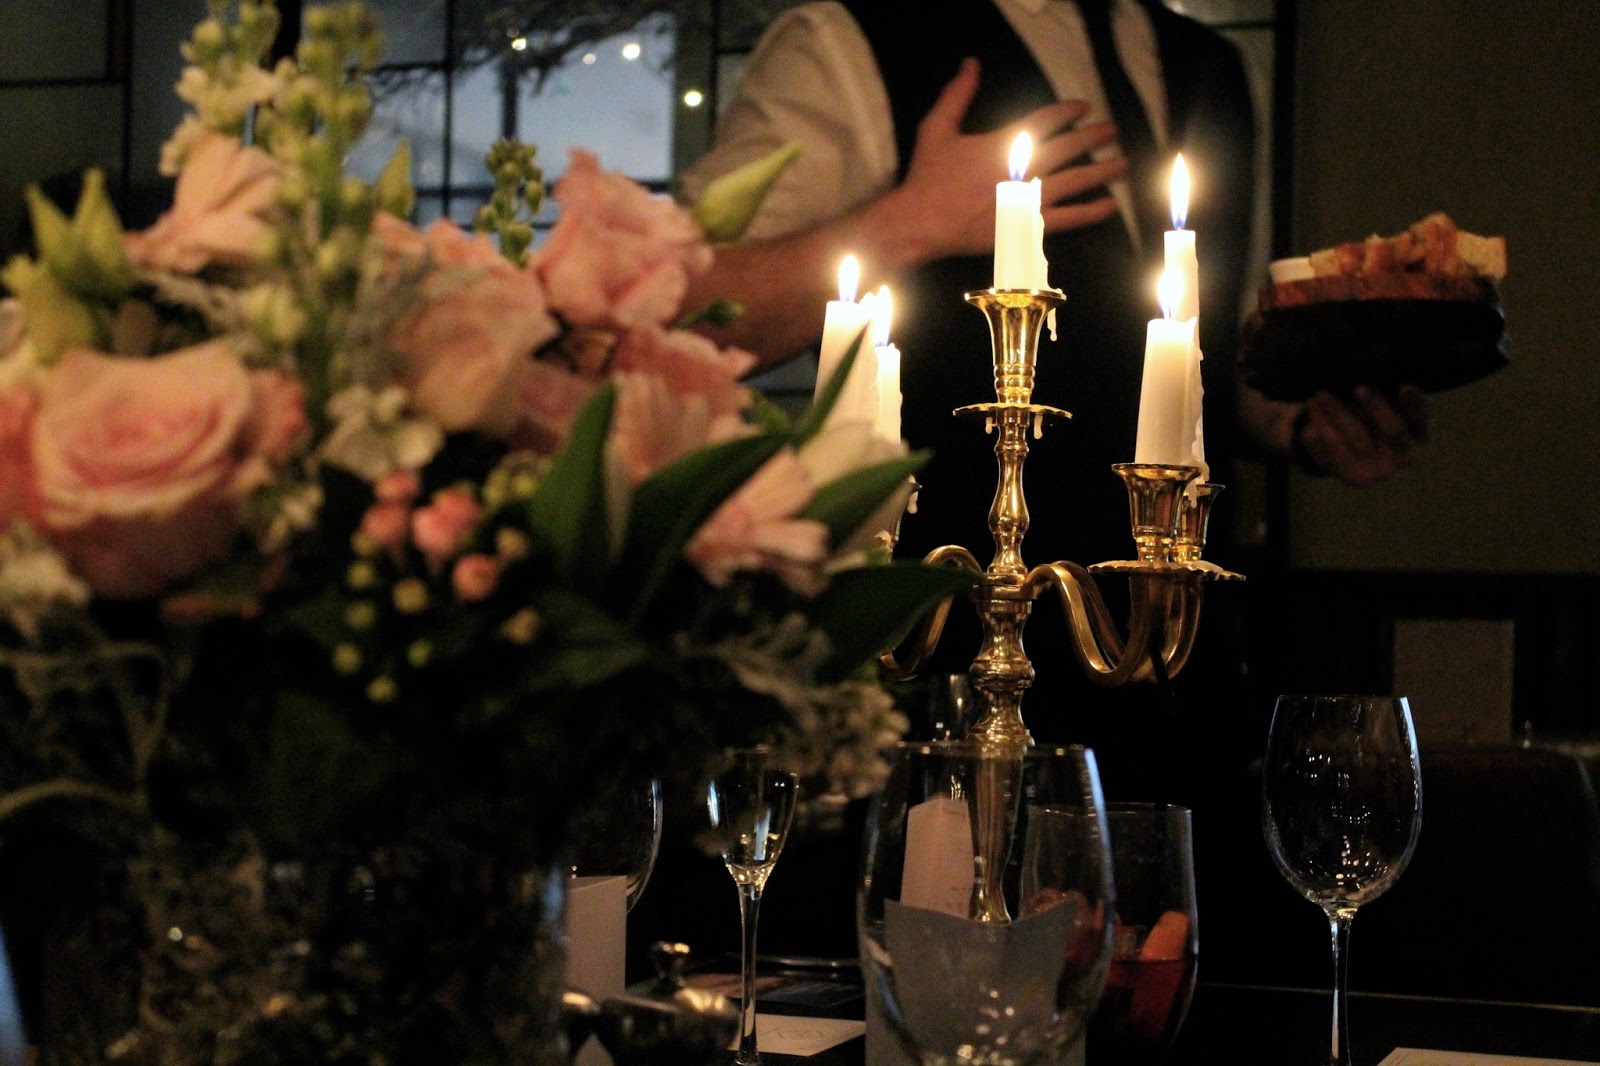 Candelabra restaurant set-up at Gusto, Leeds | The Dress Diaries